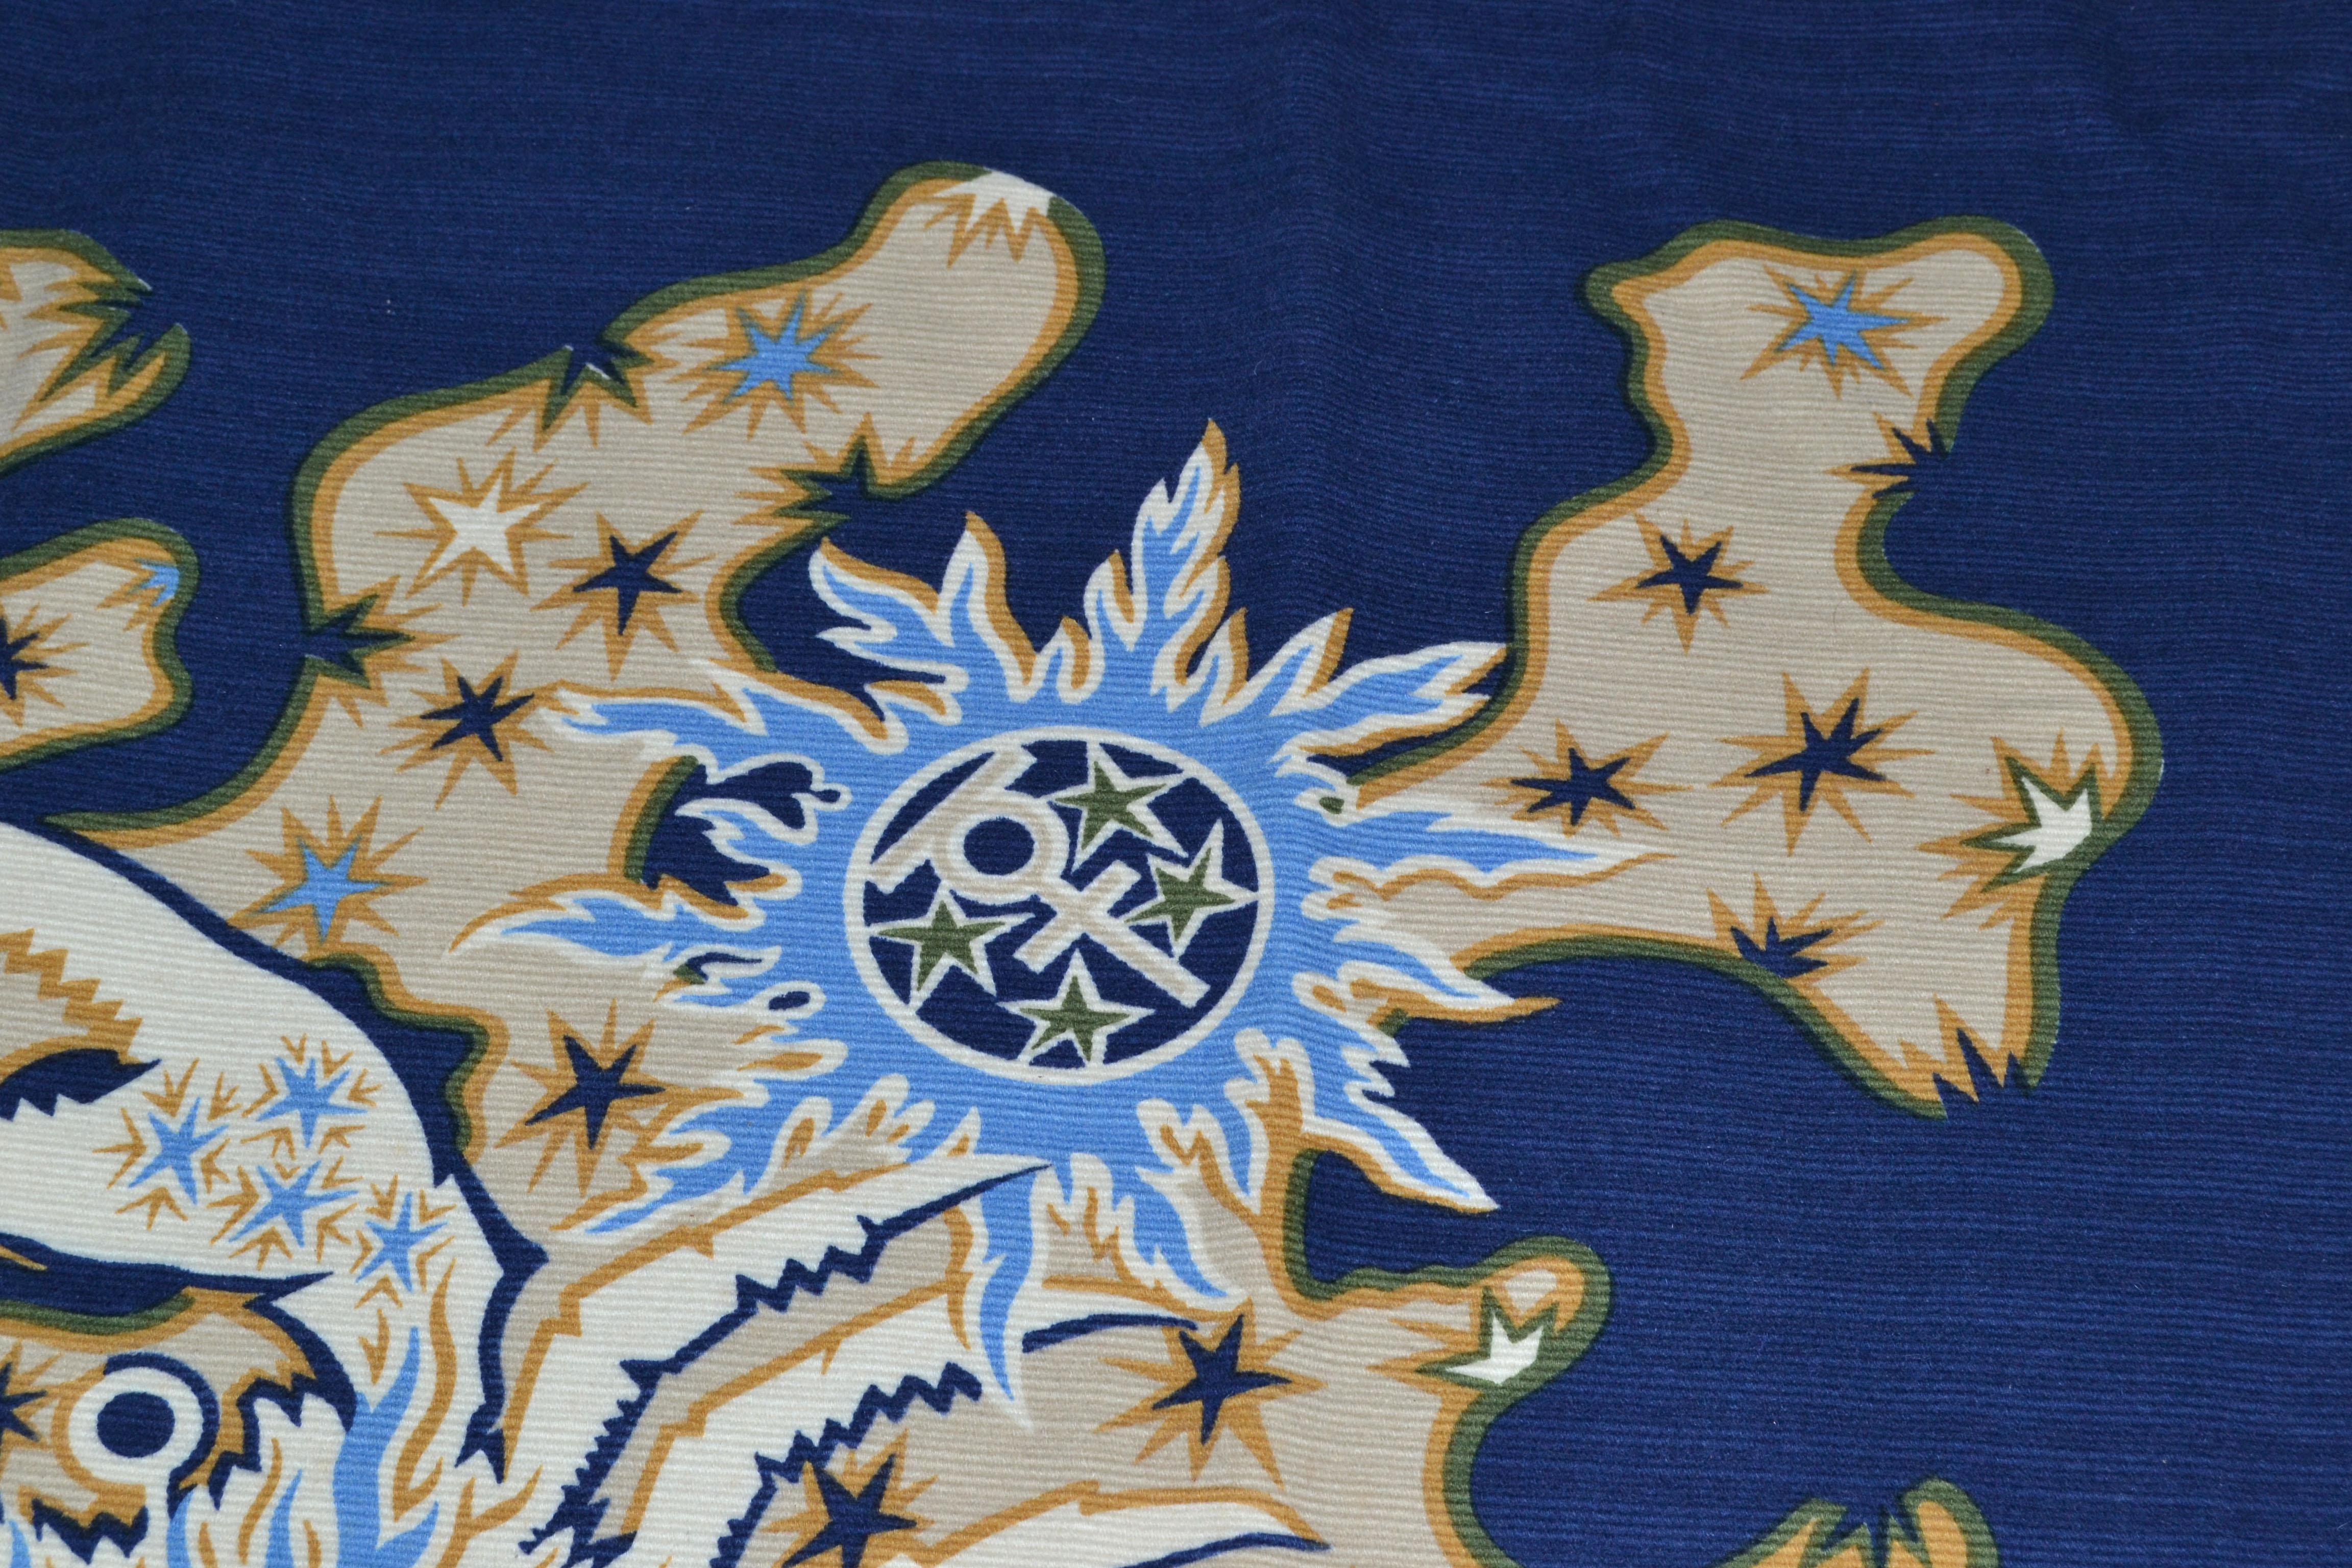 Hand-Woven Original Elie Grekoff Tapestry Zodiac Cancer Wool Paris Proof of Authenticity For Sale